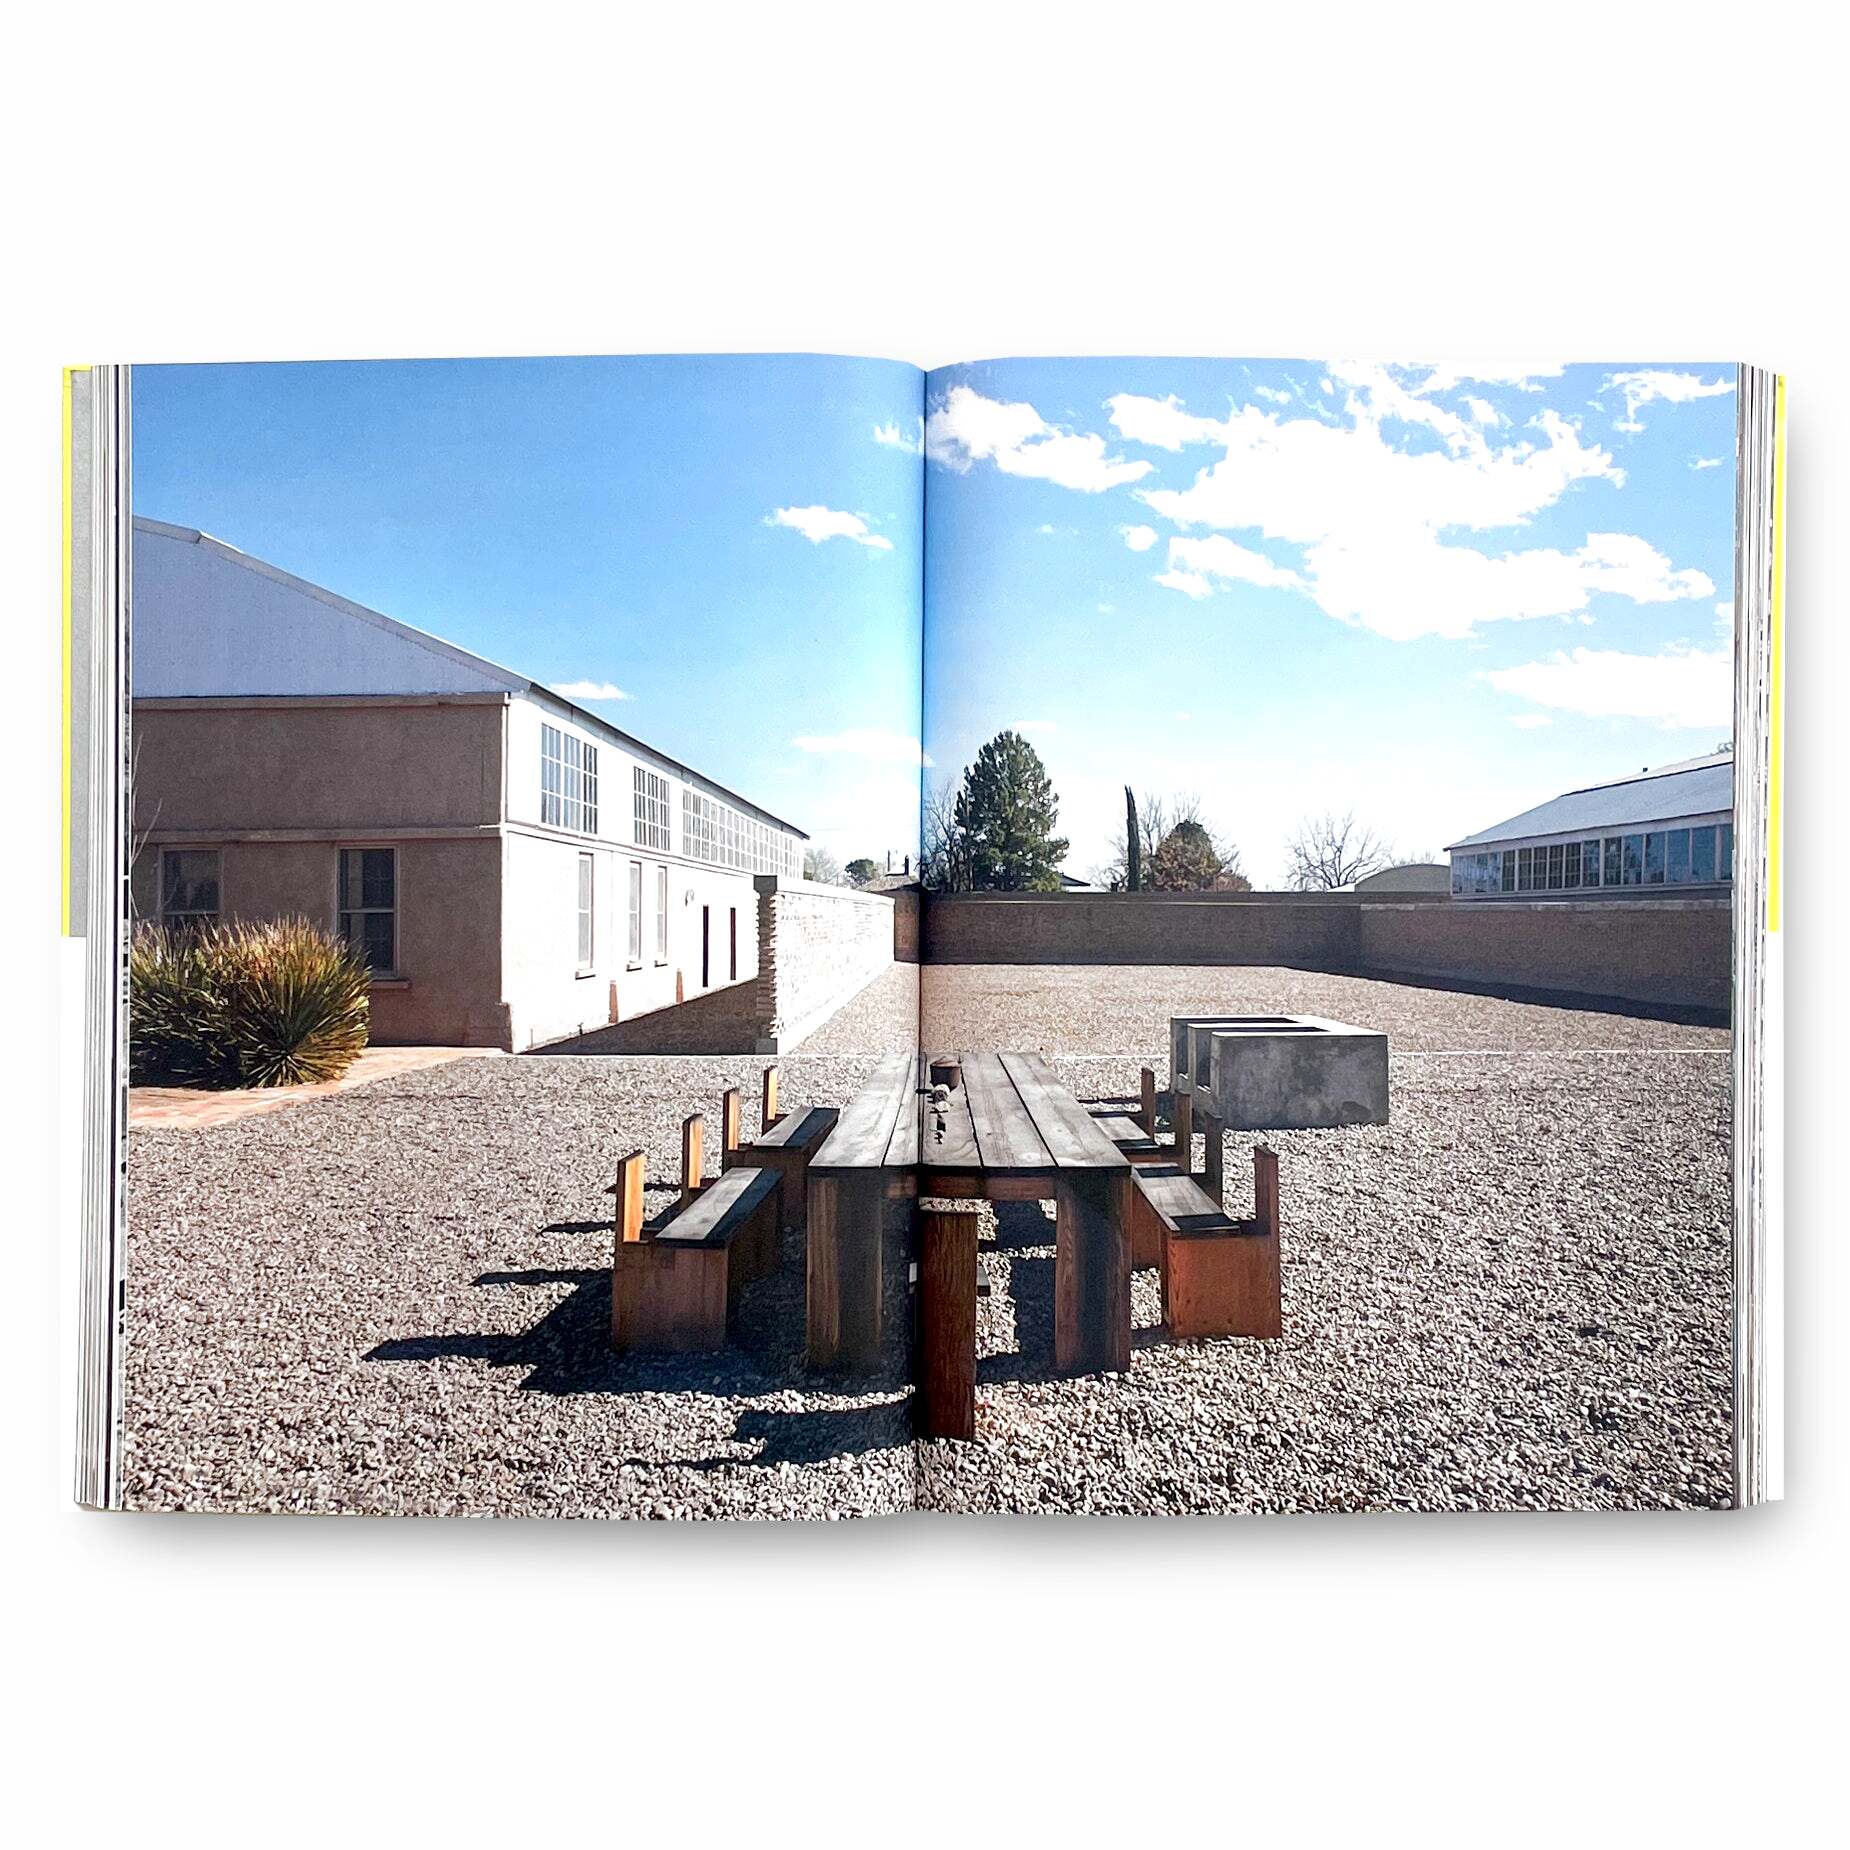 BIBLIOTHECA - Donald Judd Spaces (2nd Edition) view 3